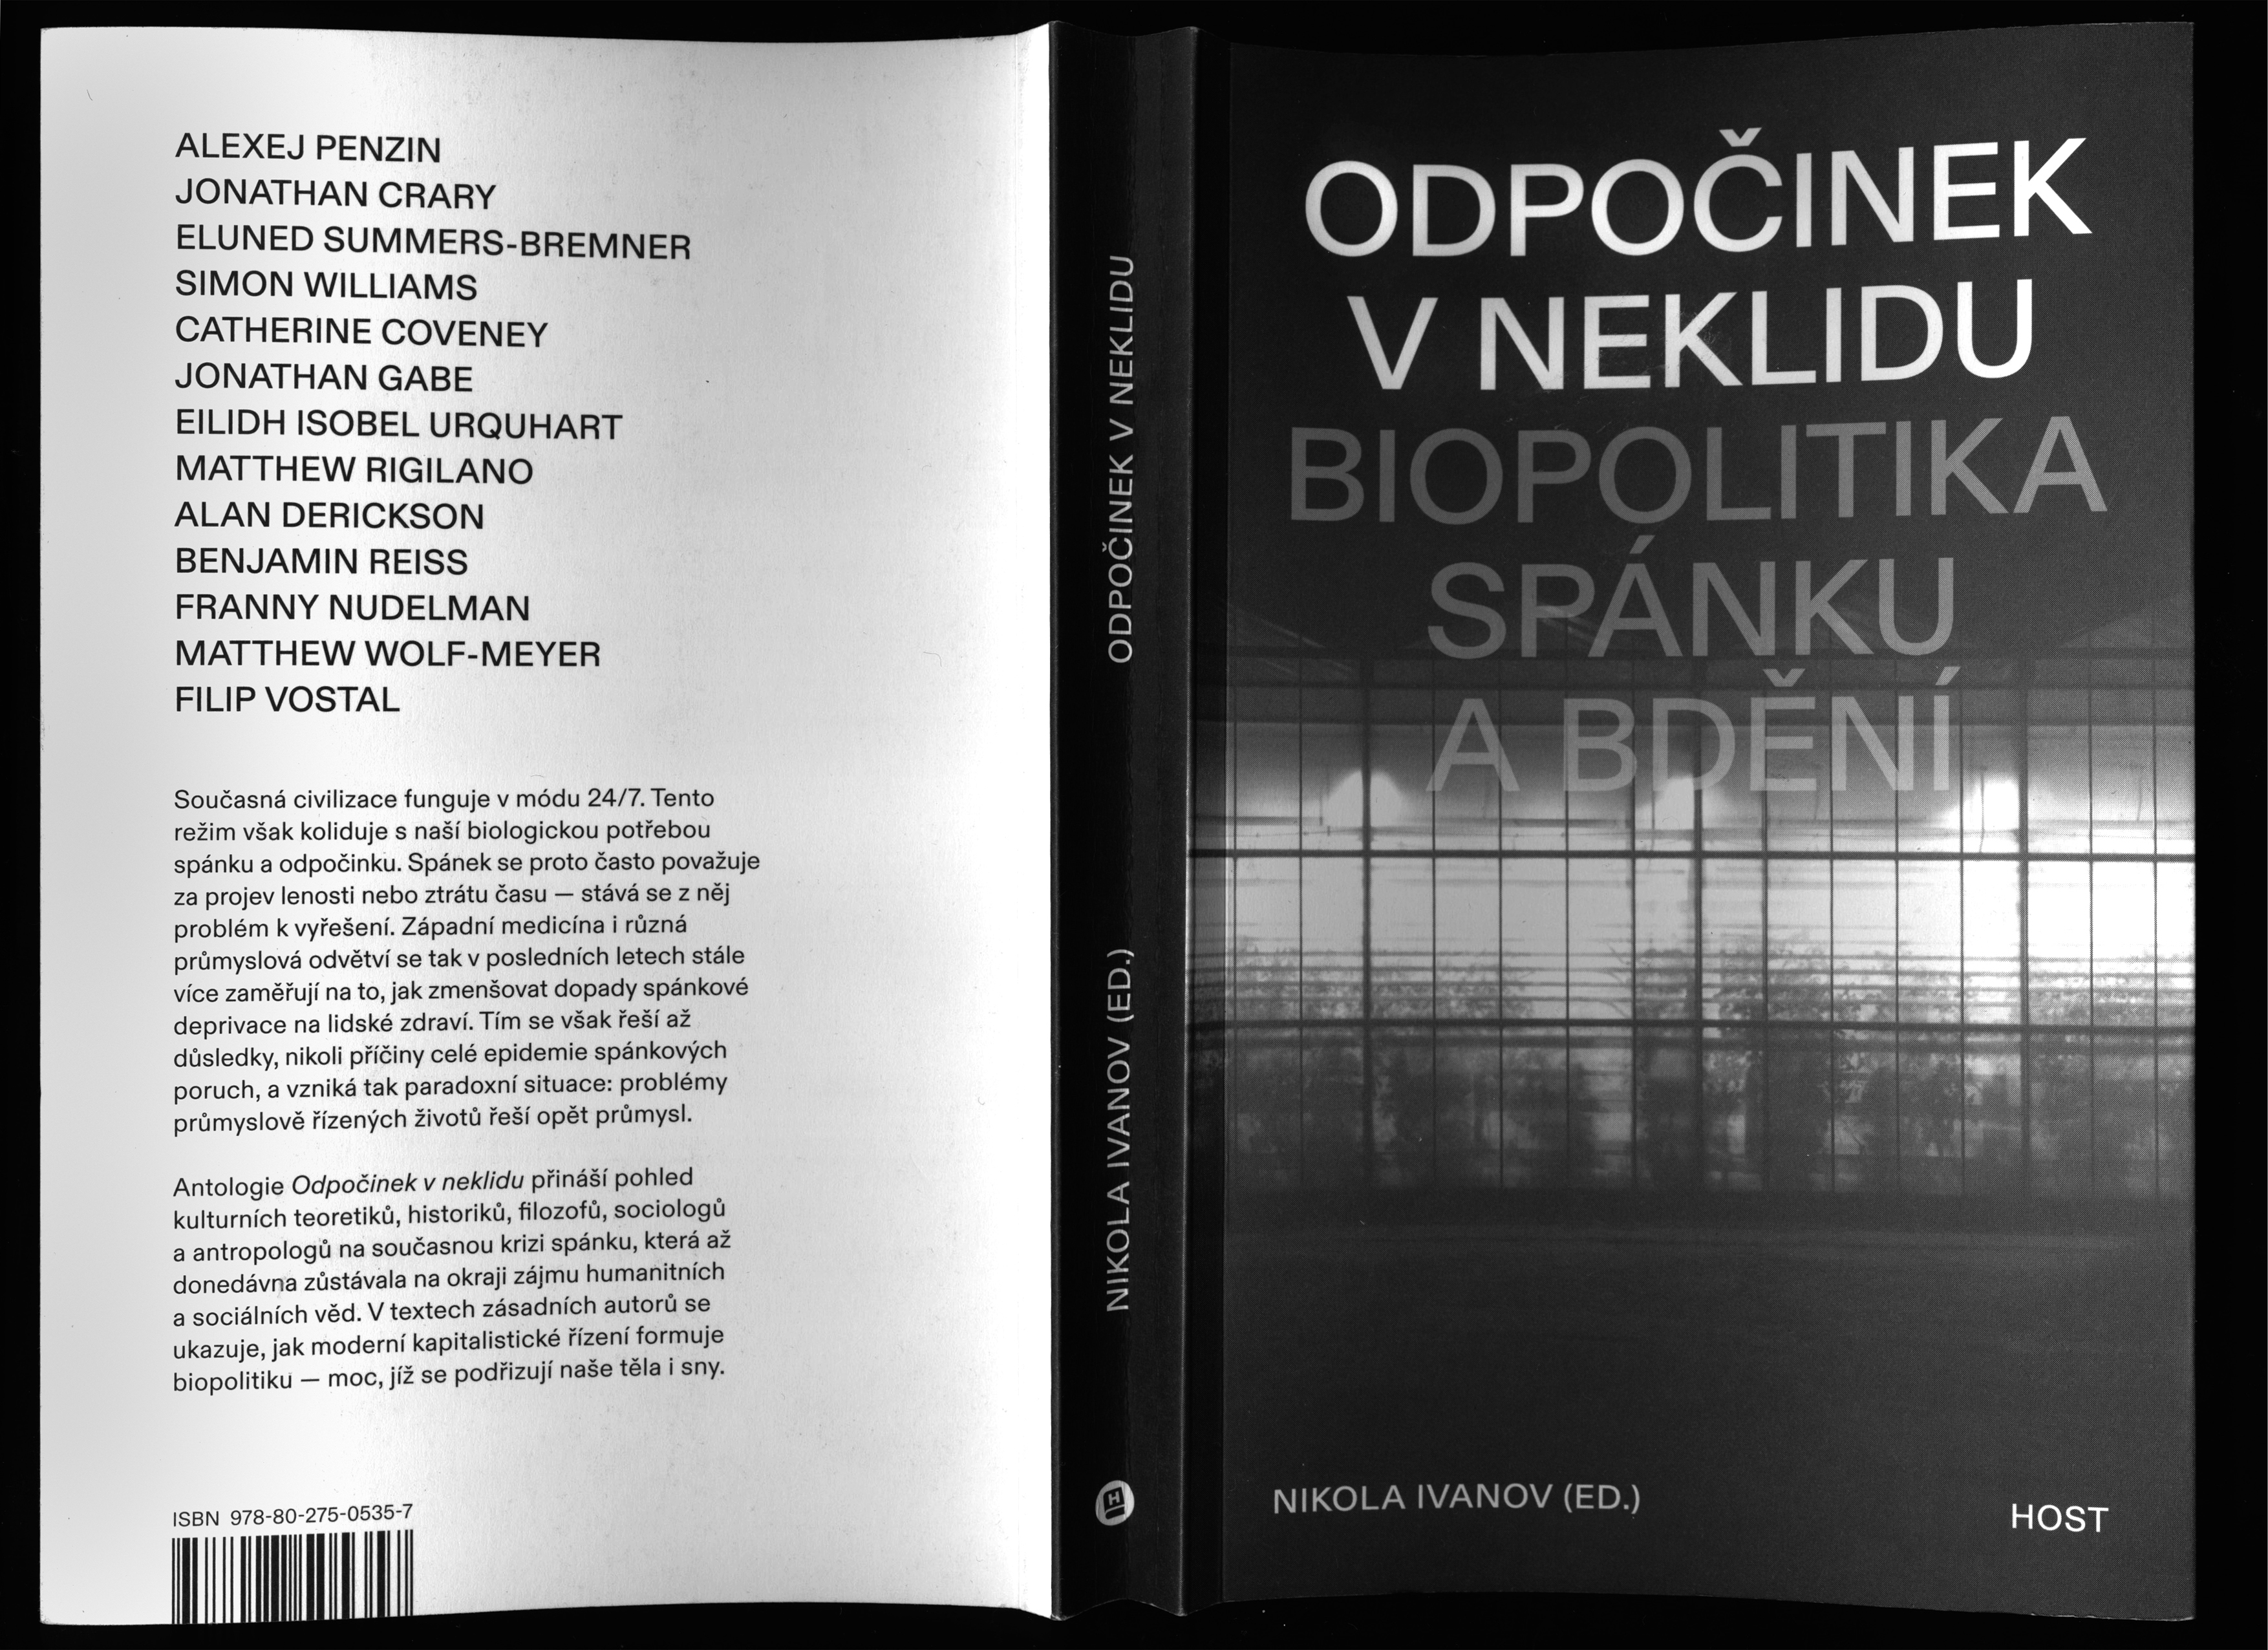 A scan of the book from which we can see the front cover where there is a night black and white photograph of the glow from a large greenhouse for growing vegetables with the inscription Rest In Restless Times: the Biopolitics of Sleep and Wakefulness, the name of the editor Nikola Ivanov and the publishing house Host, in the middle there is a black spine with the title of the book and the name of the author, on the back there are the names of the authors of the book and annotation in black letters on a white background.